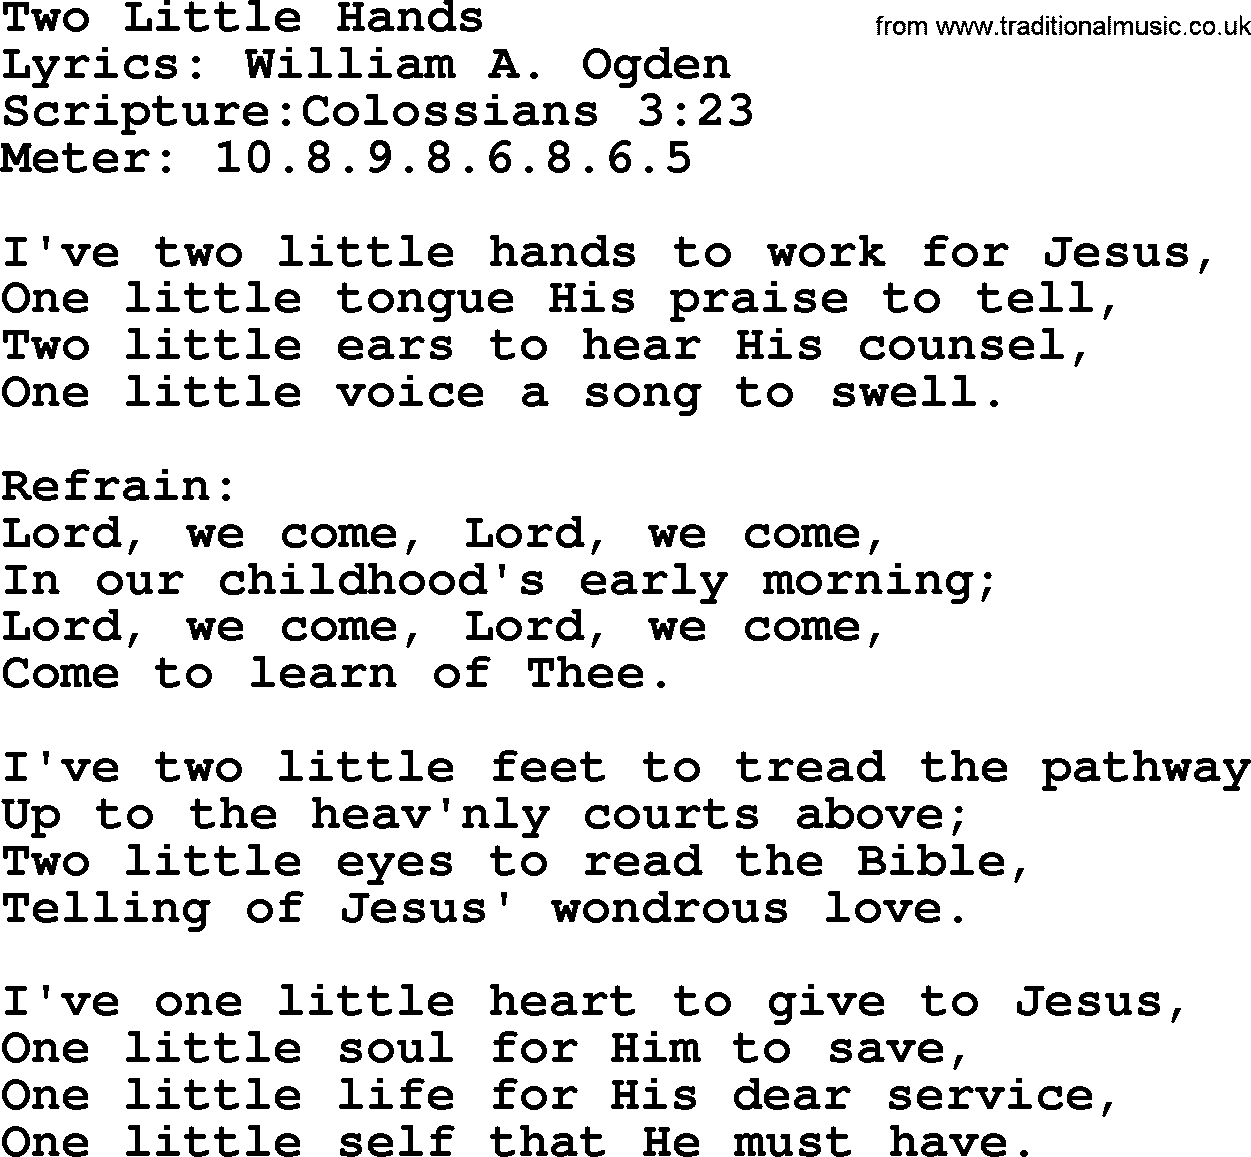 Hymns about  Angels, Hymn: Two Little Hands, lyrics, sheet music, midi & Mp3 music with PDF